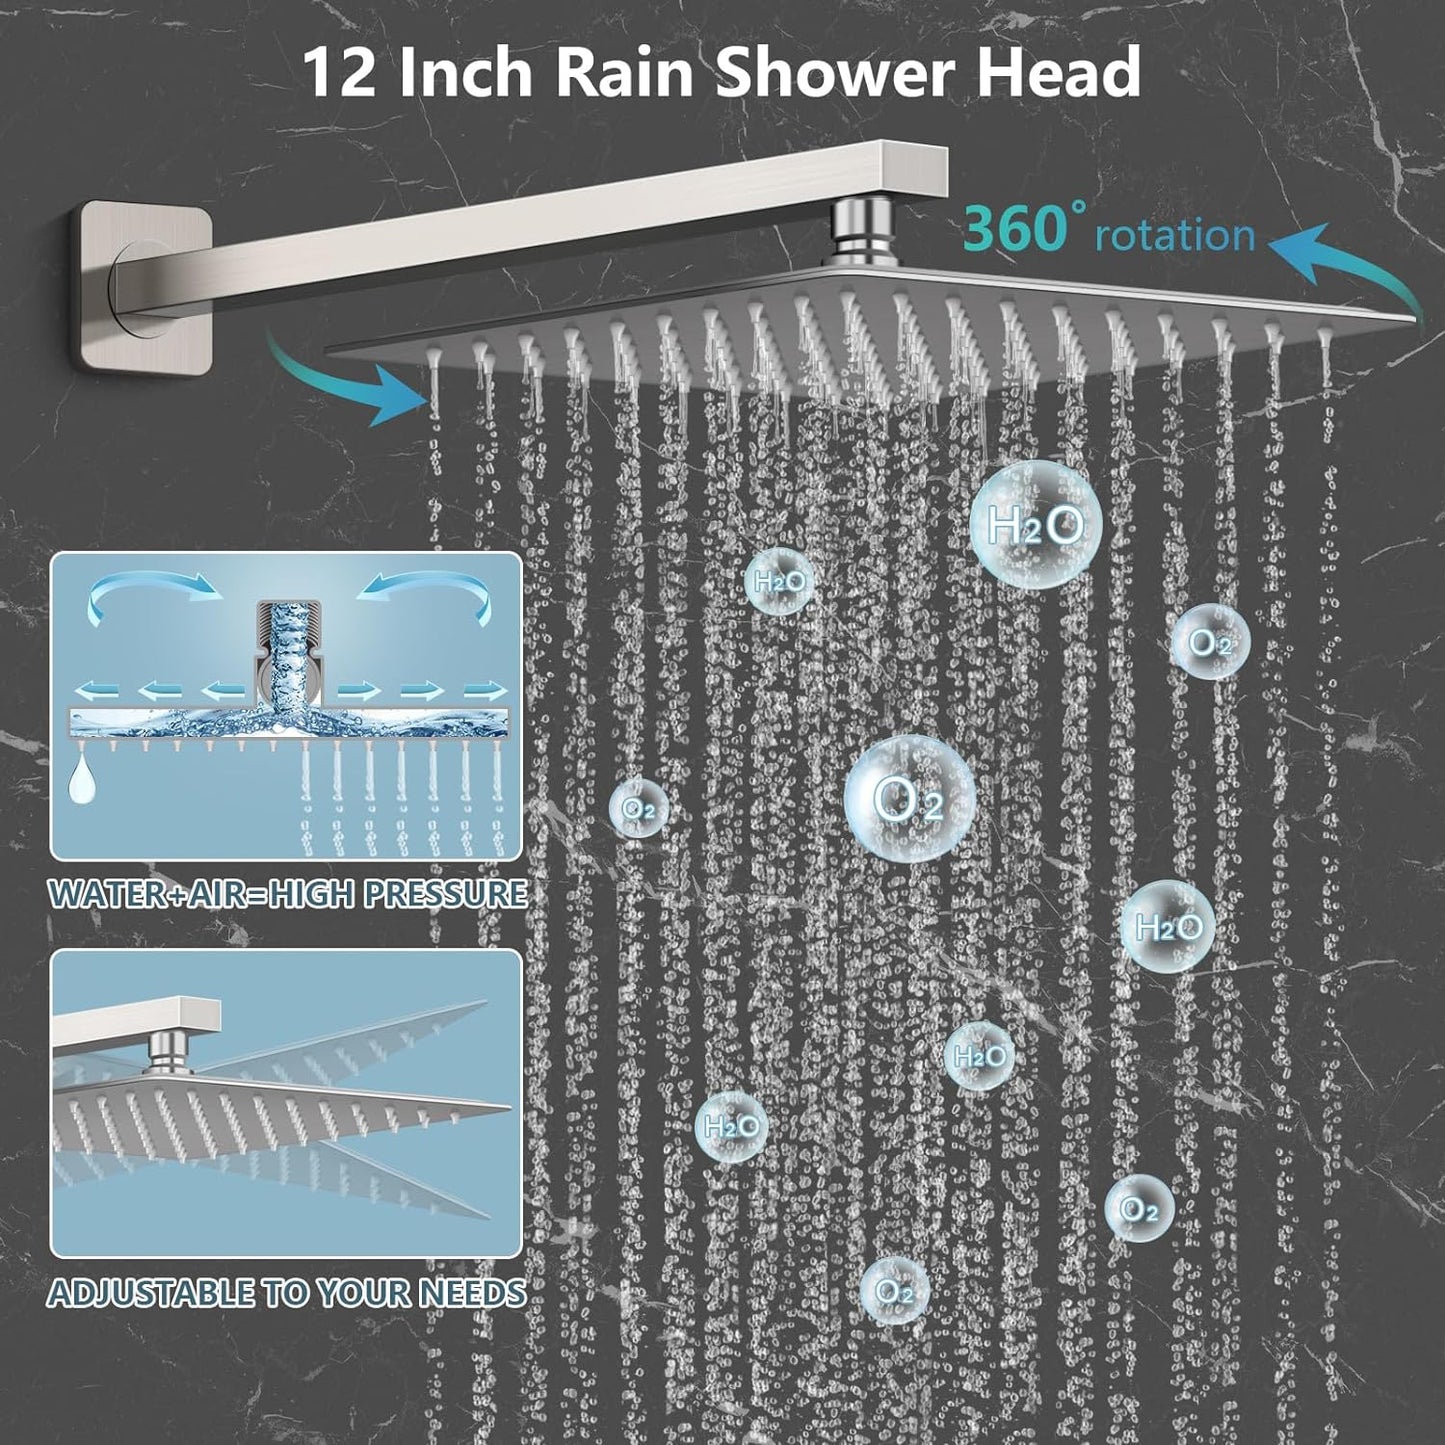 Baetuy 12 Inch Shower Faucet Set, Rainfall Shower System with High Pressure Handheld Shower Head and Square Fixed Shower Head,Spray Wall Mounted Rainfall Shower Fixtures (Brushed Nickel, 12'-Mo